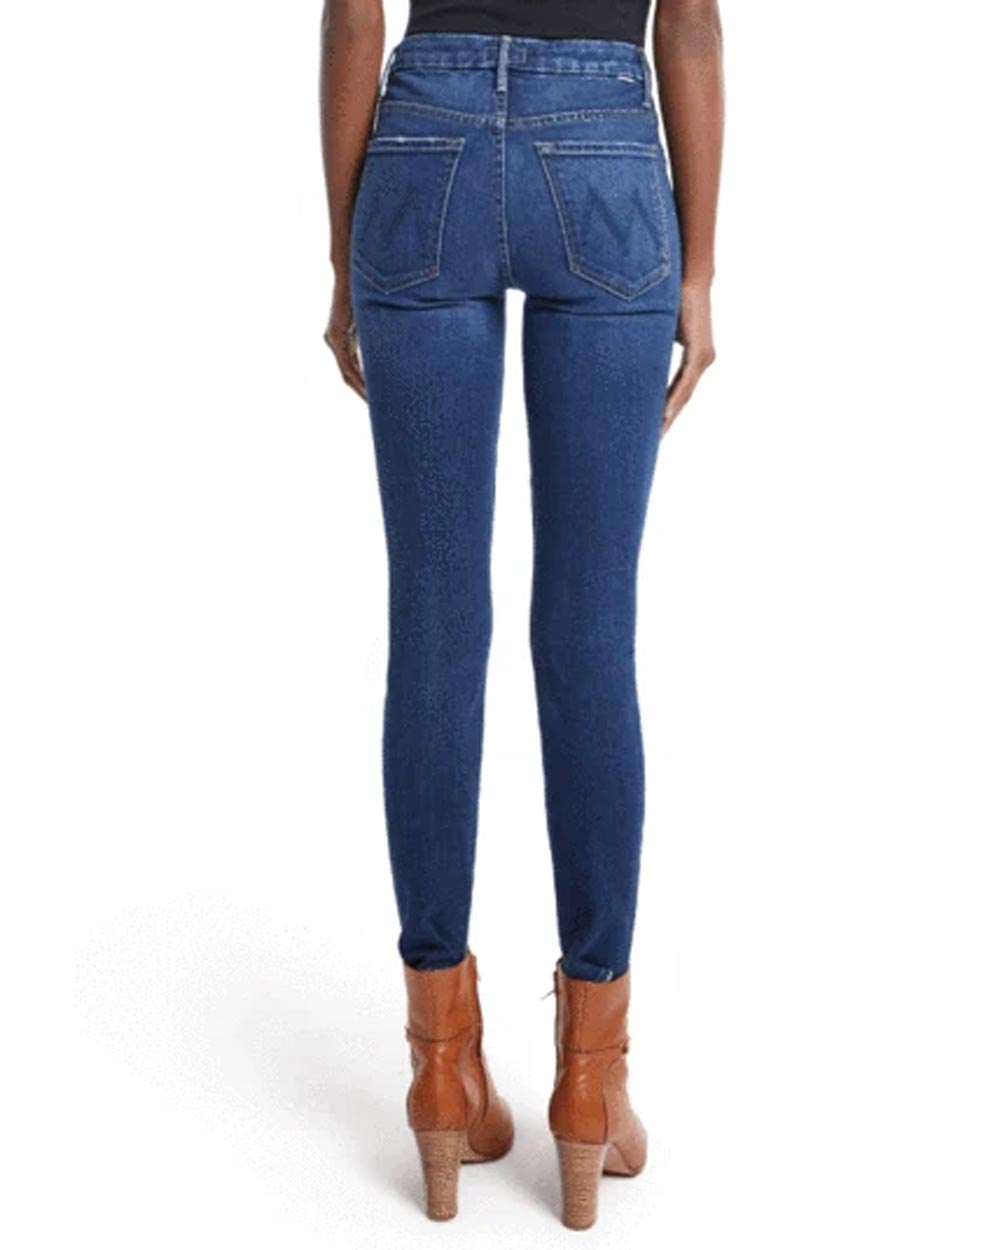 High Waisted Looker Jean in Until Next Time